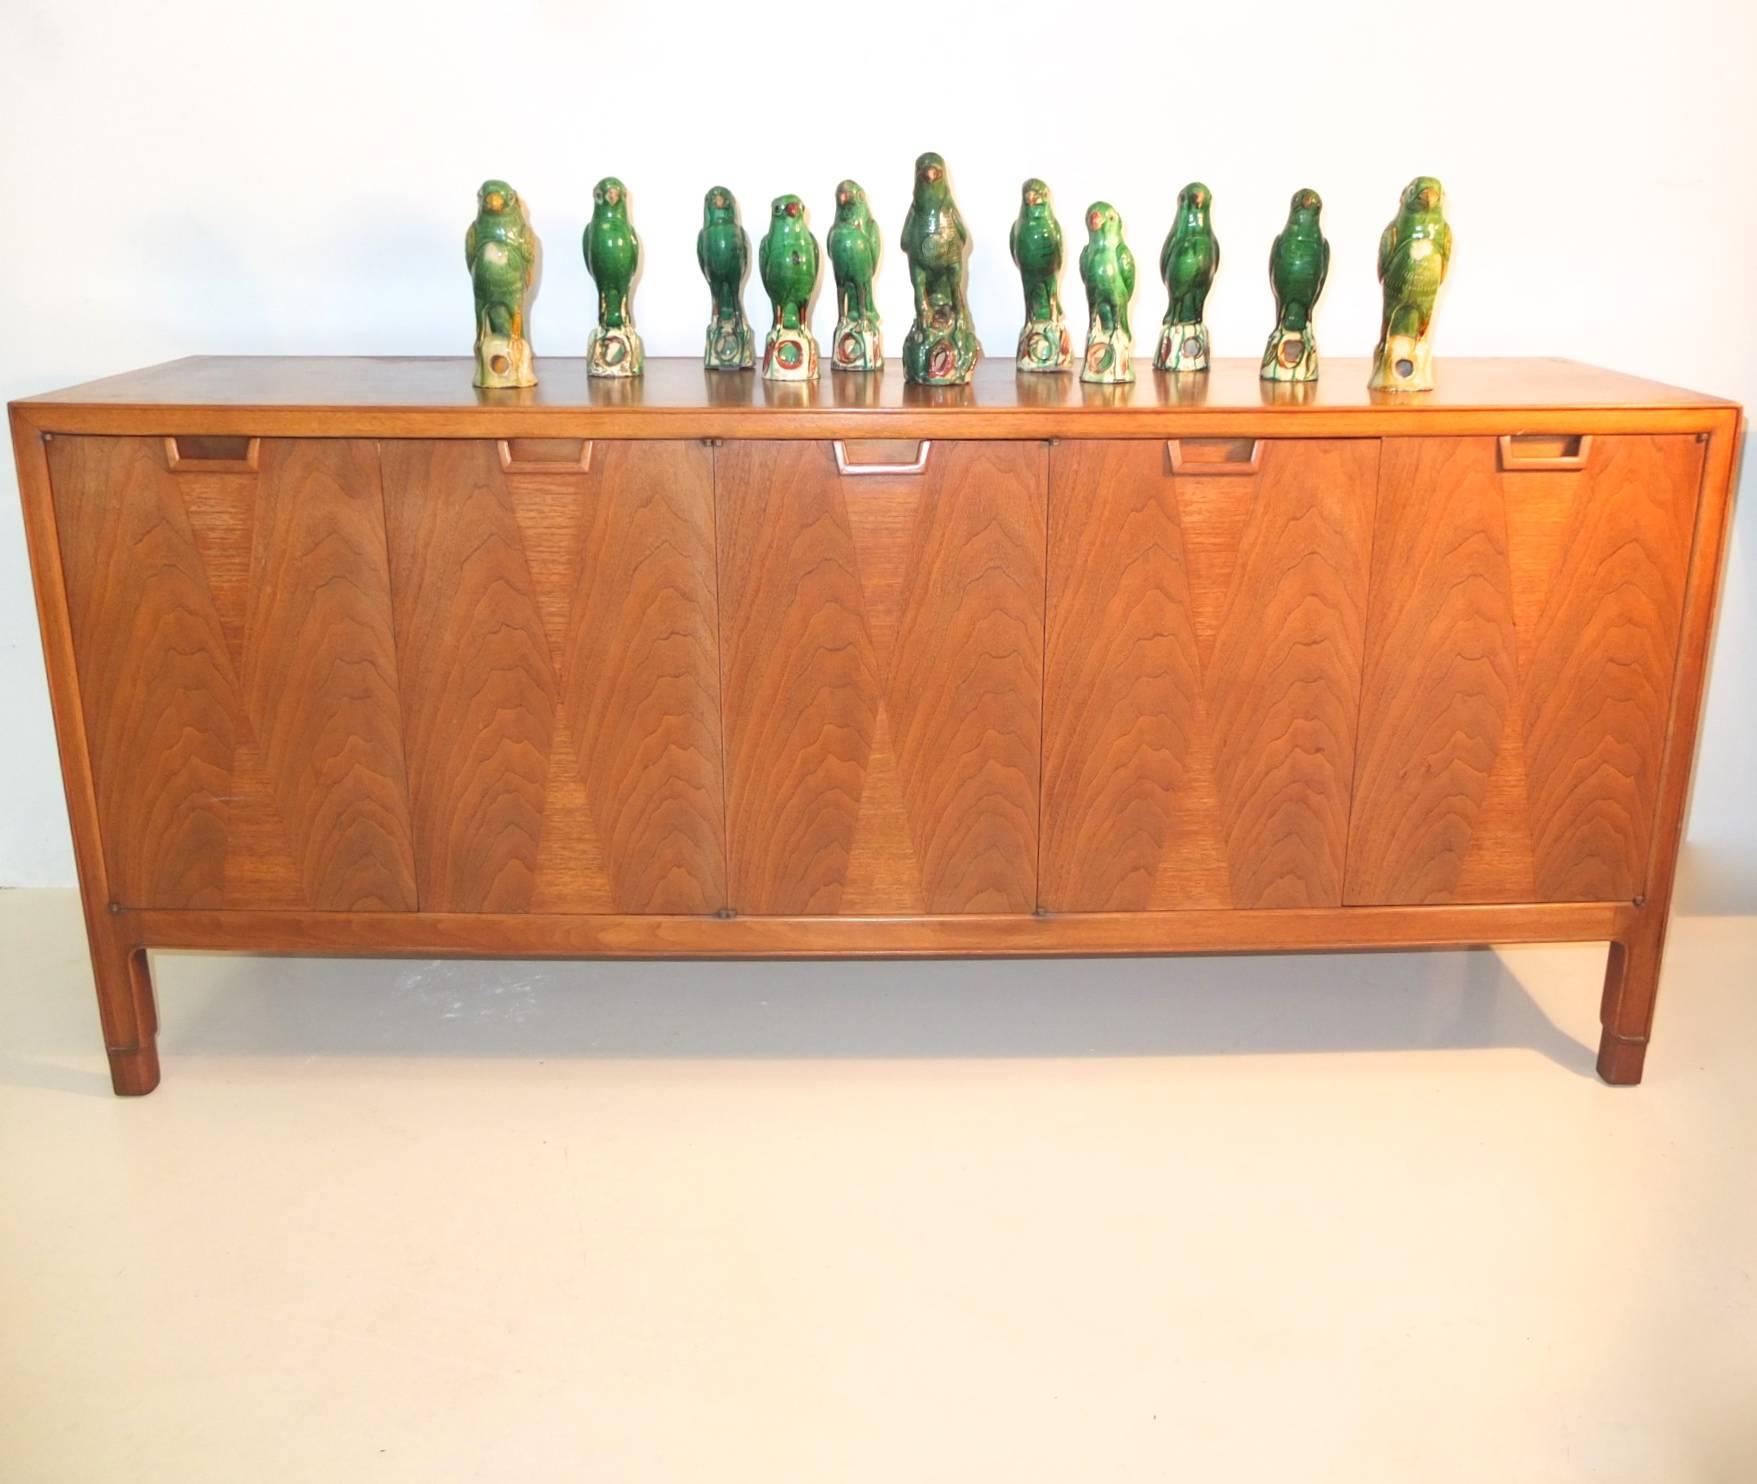 Mid-Century Modern walnut five-door sideboard with vertical bowtie inlay produced by Mt. Airy for John Stuart's Janus Collection. First two doors open to reveal three drawers. Third, fourth and fifth door open to cabinet divided by a single fixed